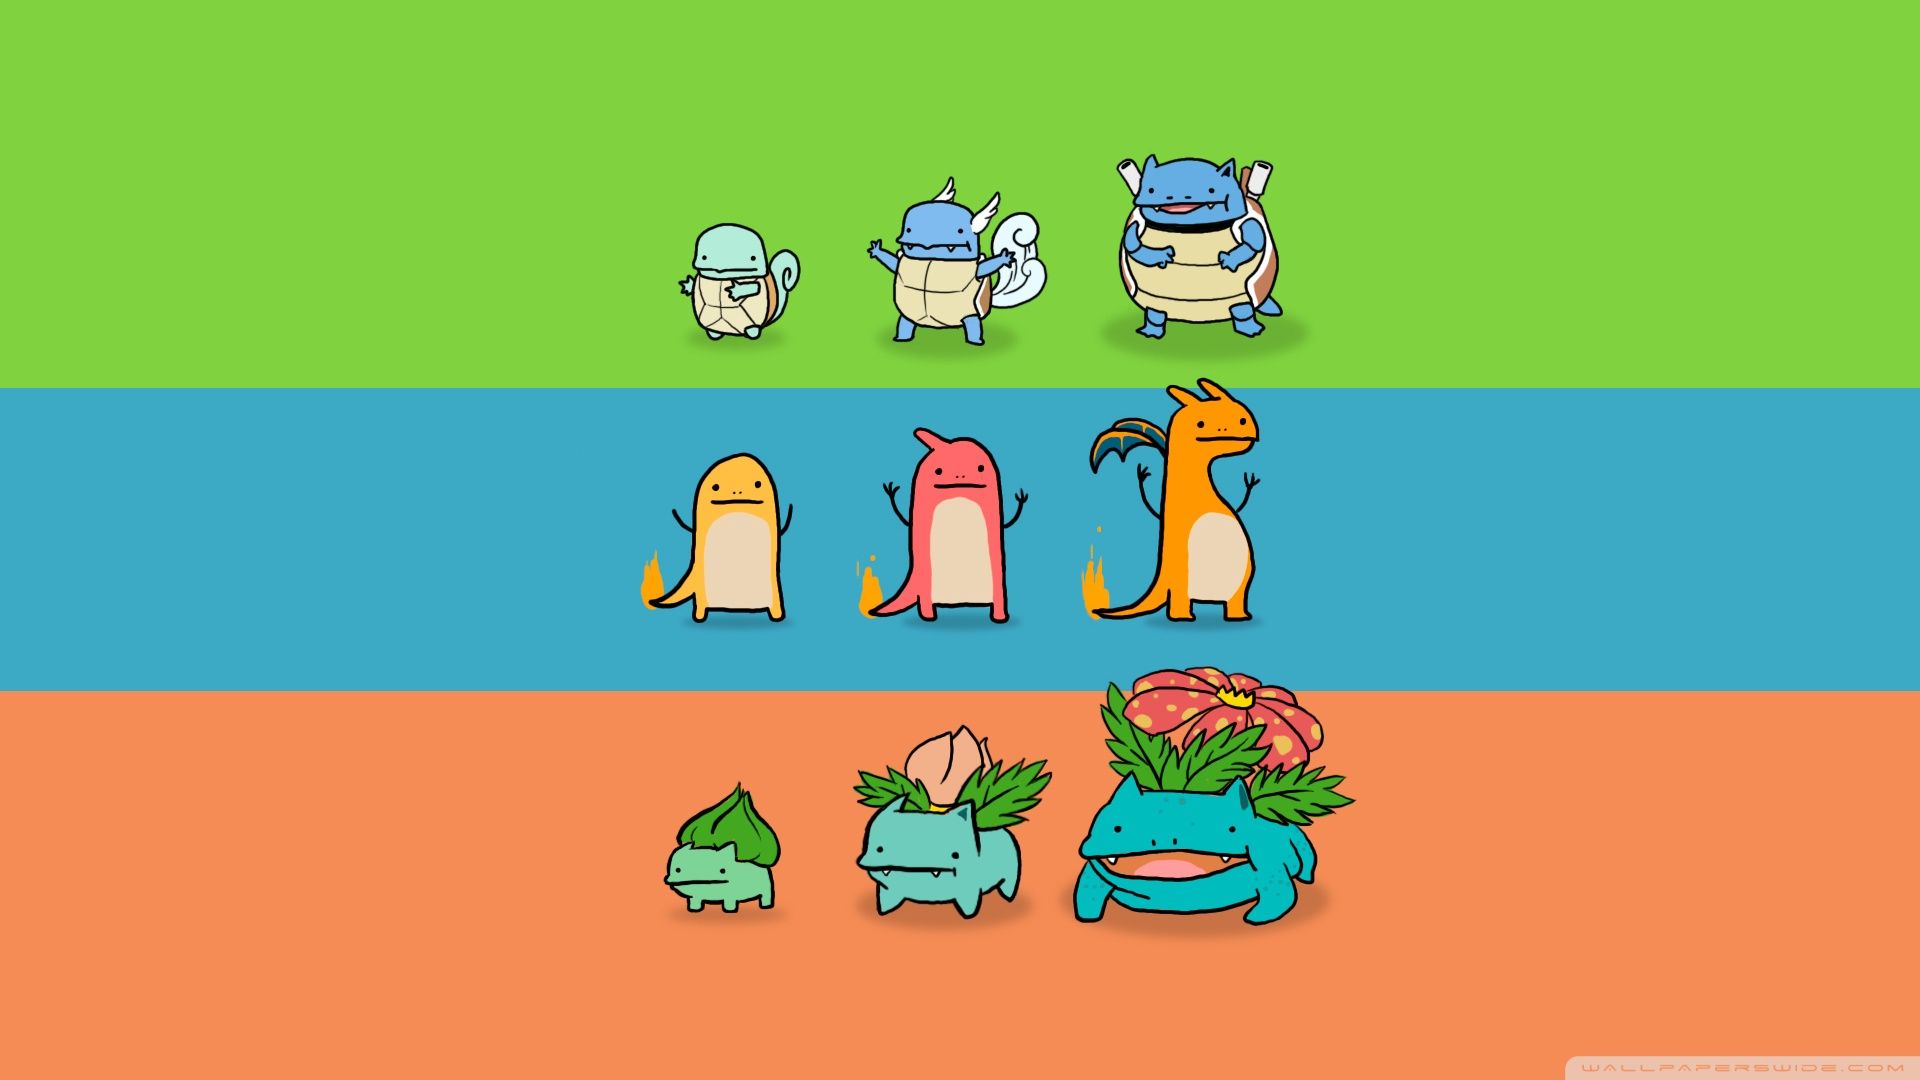 Download Bulbasaur Charmander And Squirtle Wallpaper 1920x1080